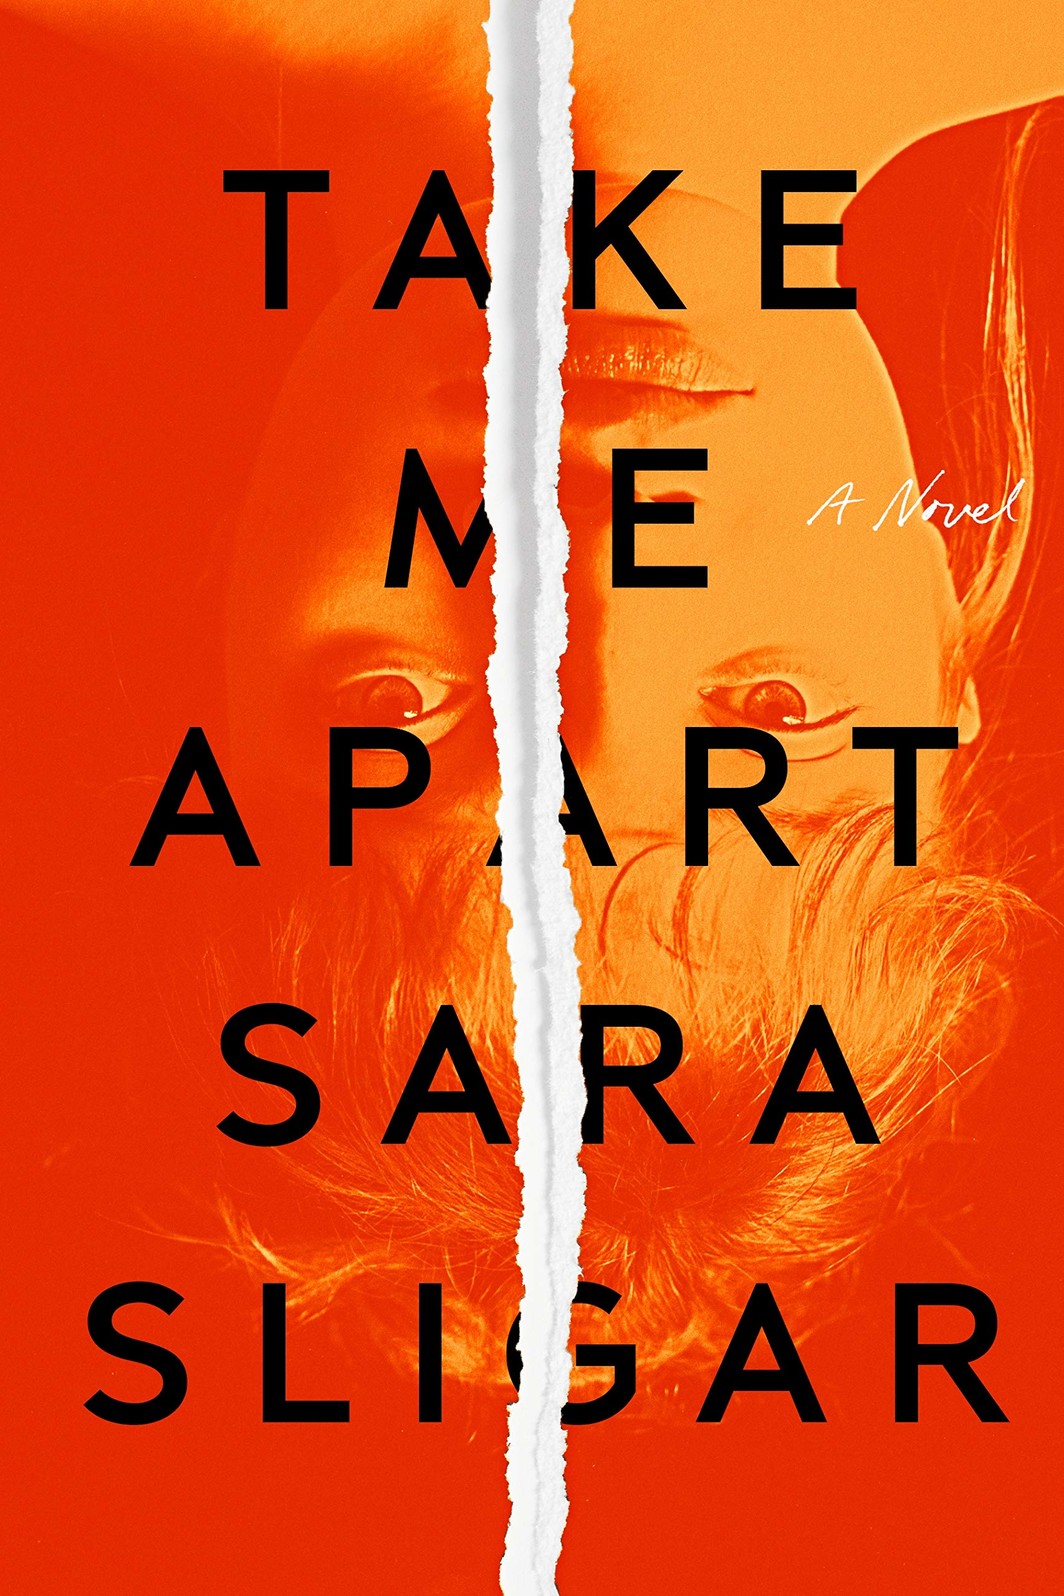 The cover of Take Me Apart